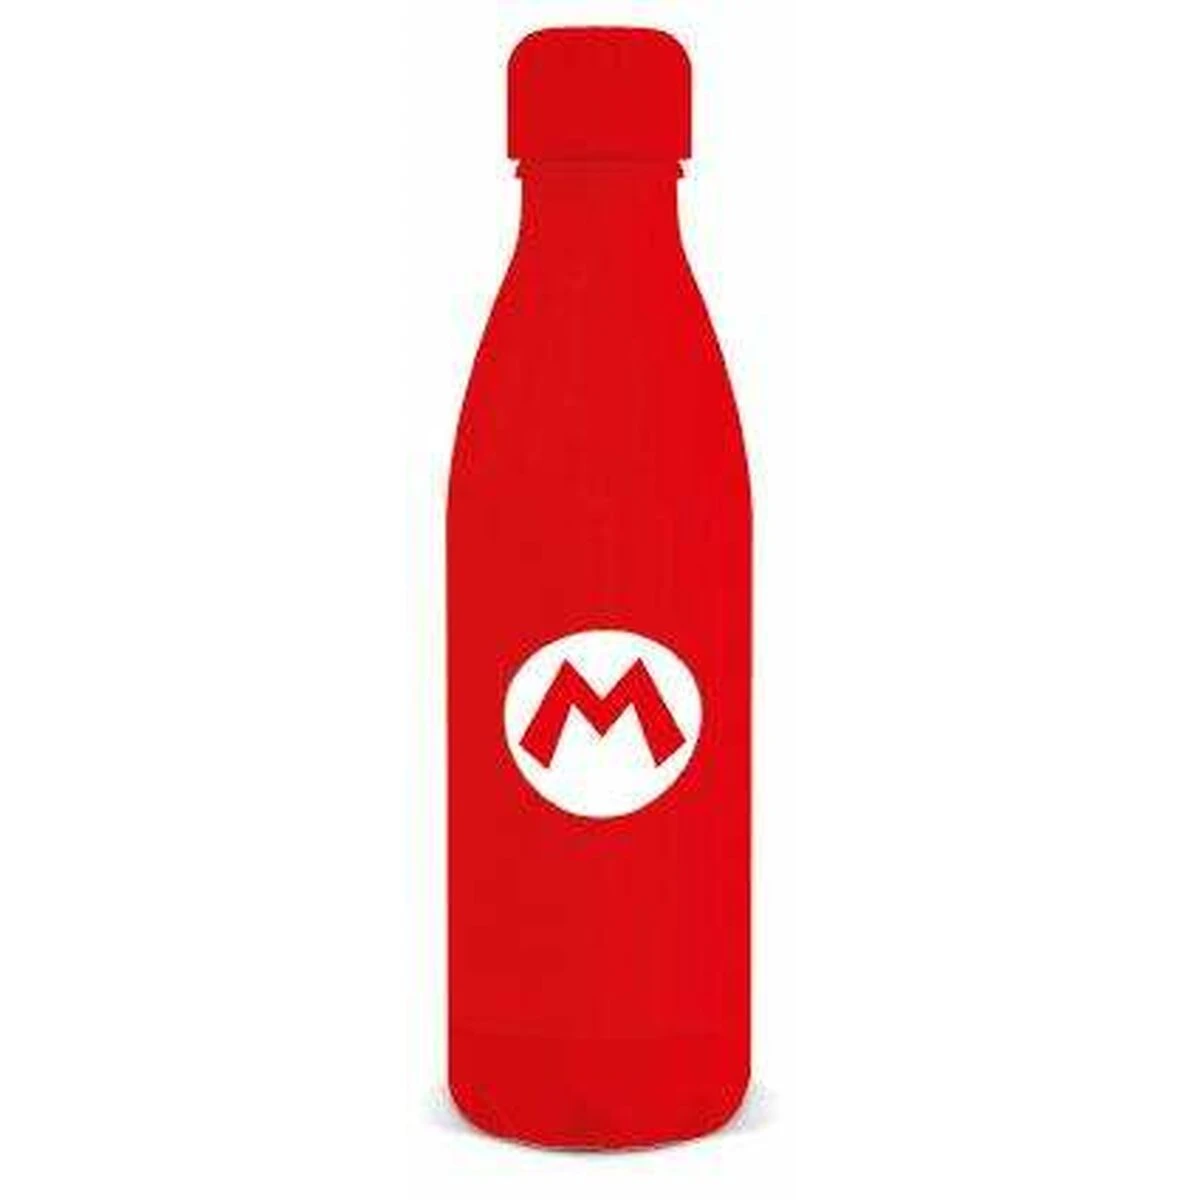 Red bottle with M logo